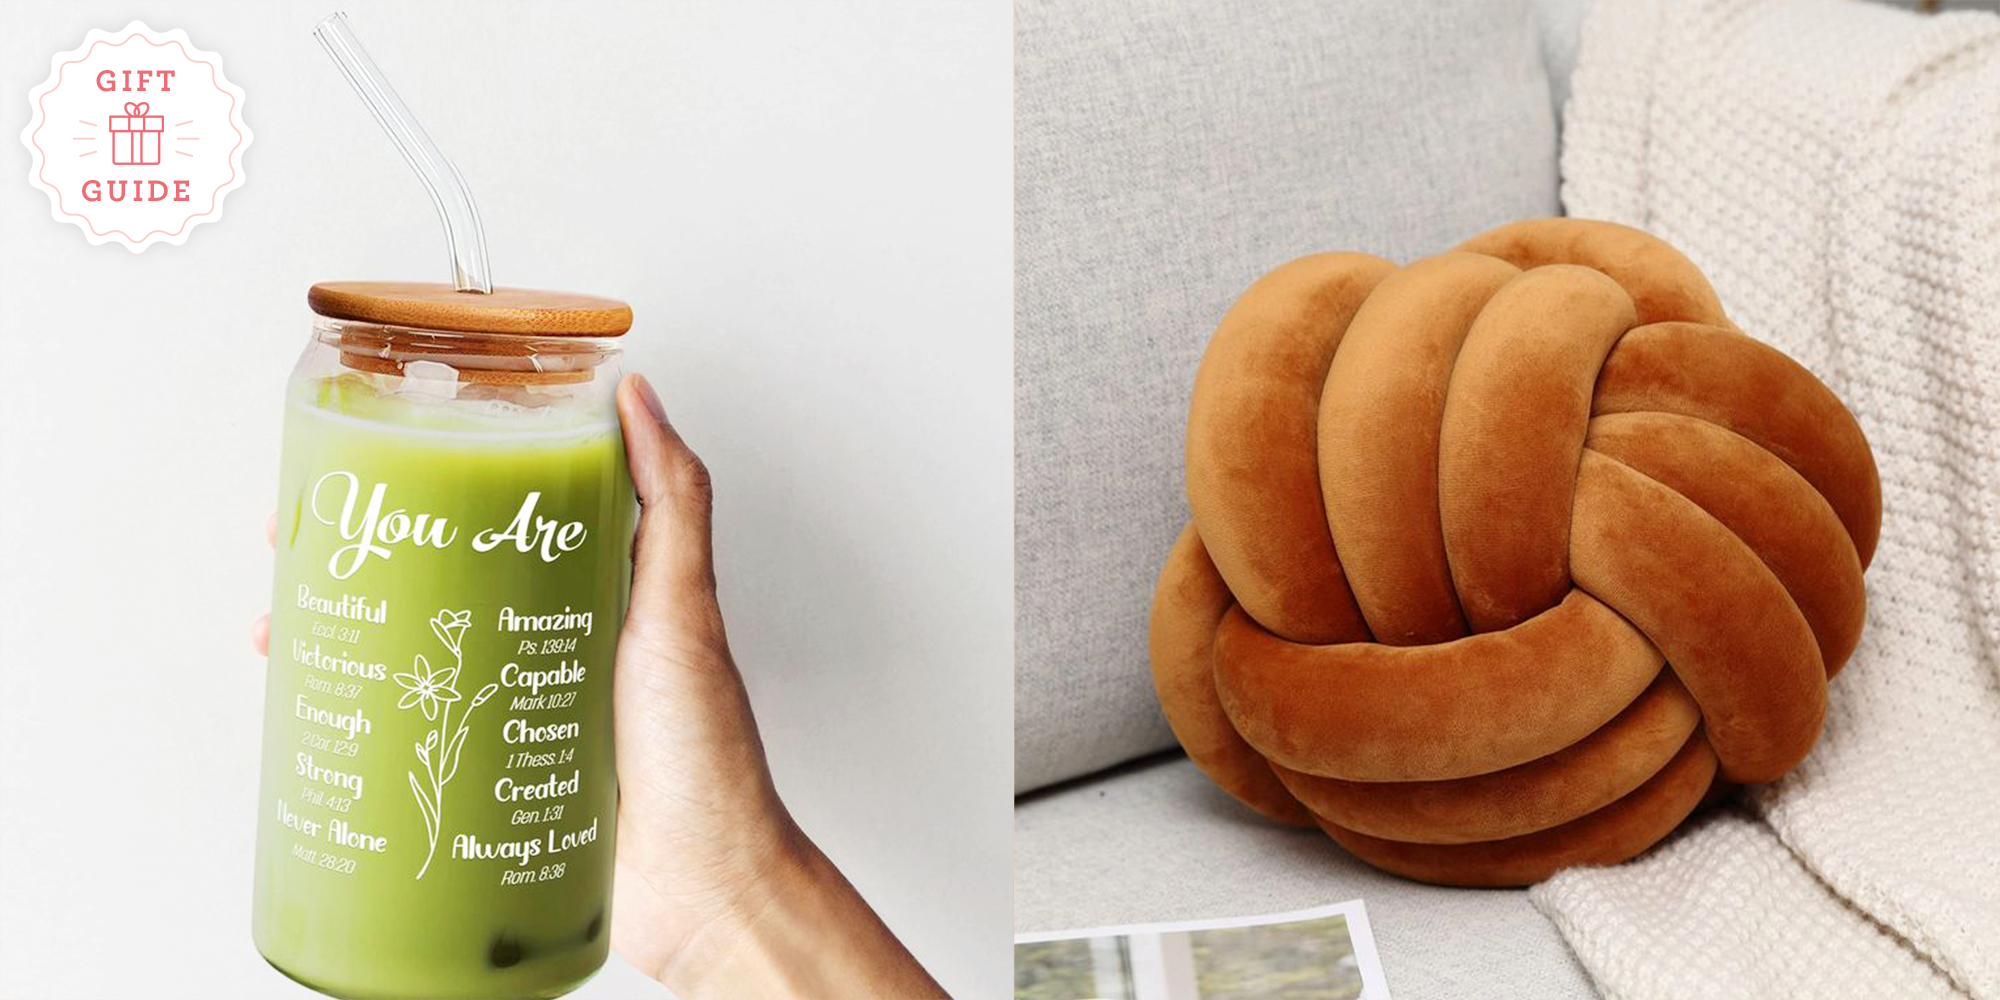 21 Wickedly Funny Gifts For Your Girlfriend That'll Make Her LOL